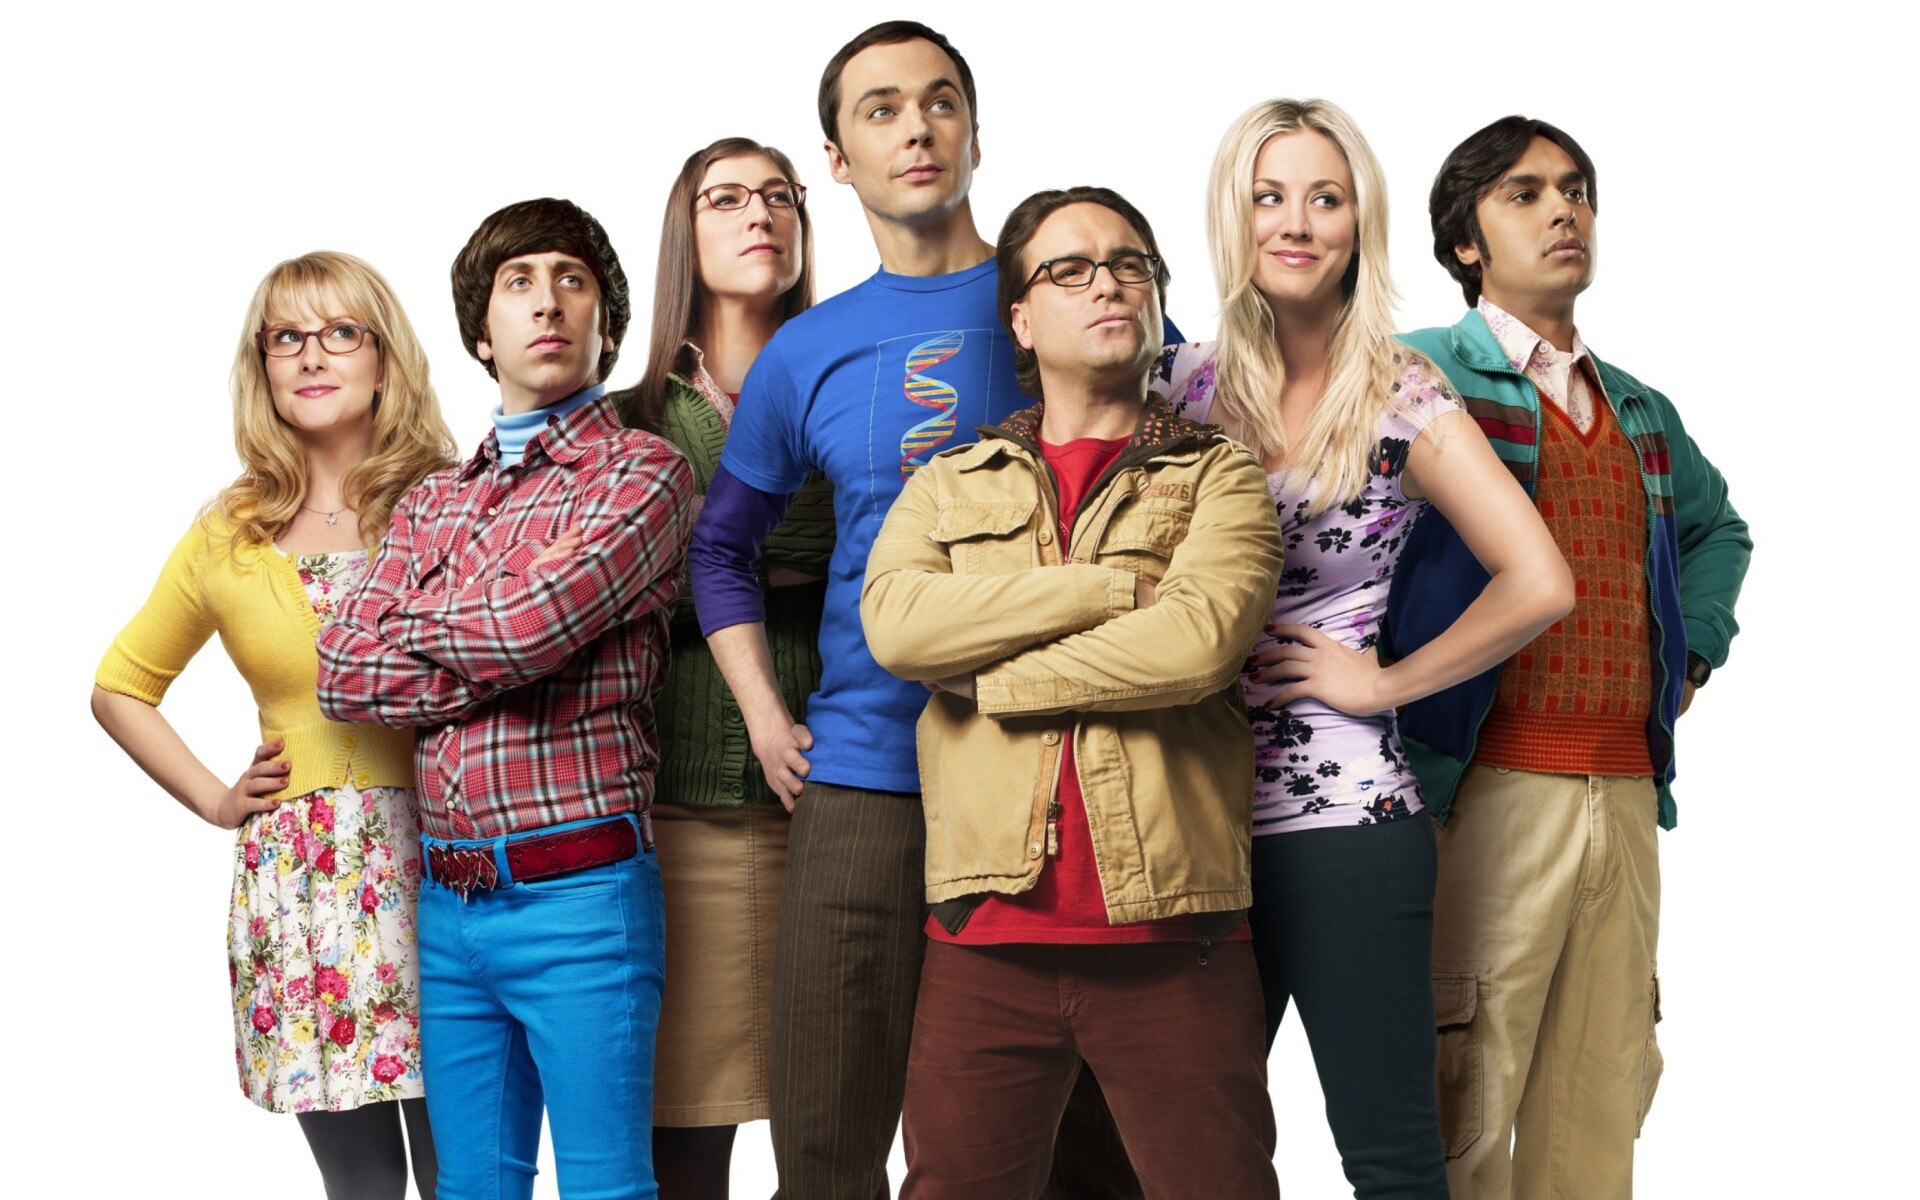 The Big Bang Theory: Physicists Leonard and Sheldon find their nerd-centric social circle with pals Howard and Raj expanding when aspiring actress Penny moves in next door. 1920x1200 HD Wallpaper.